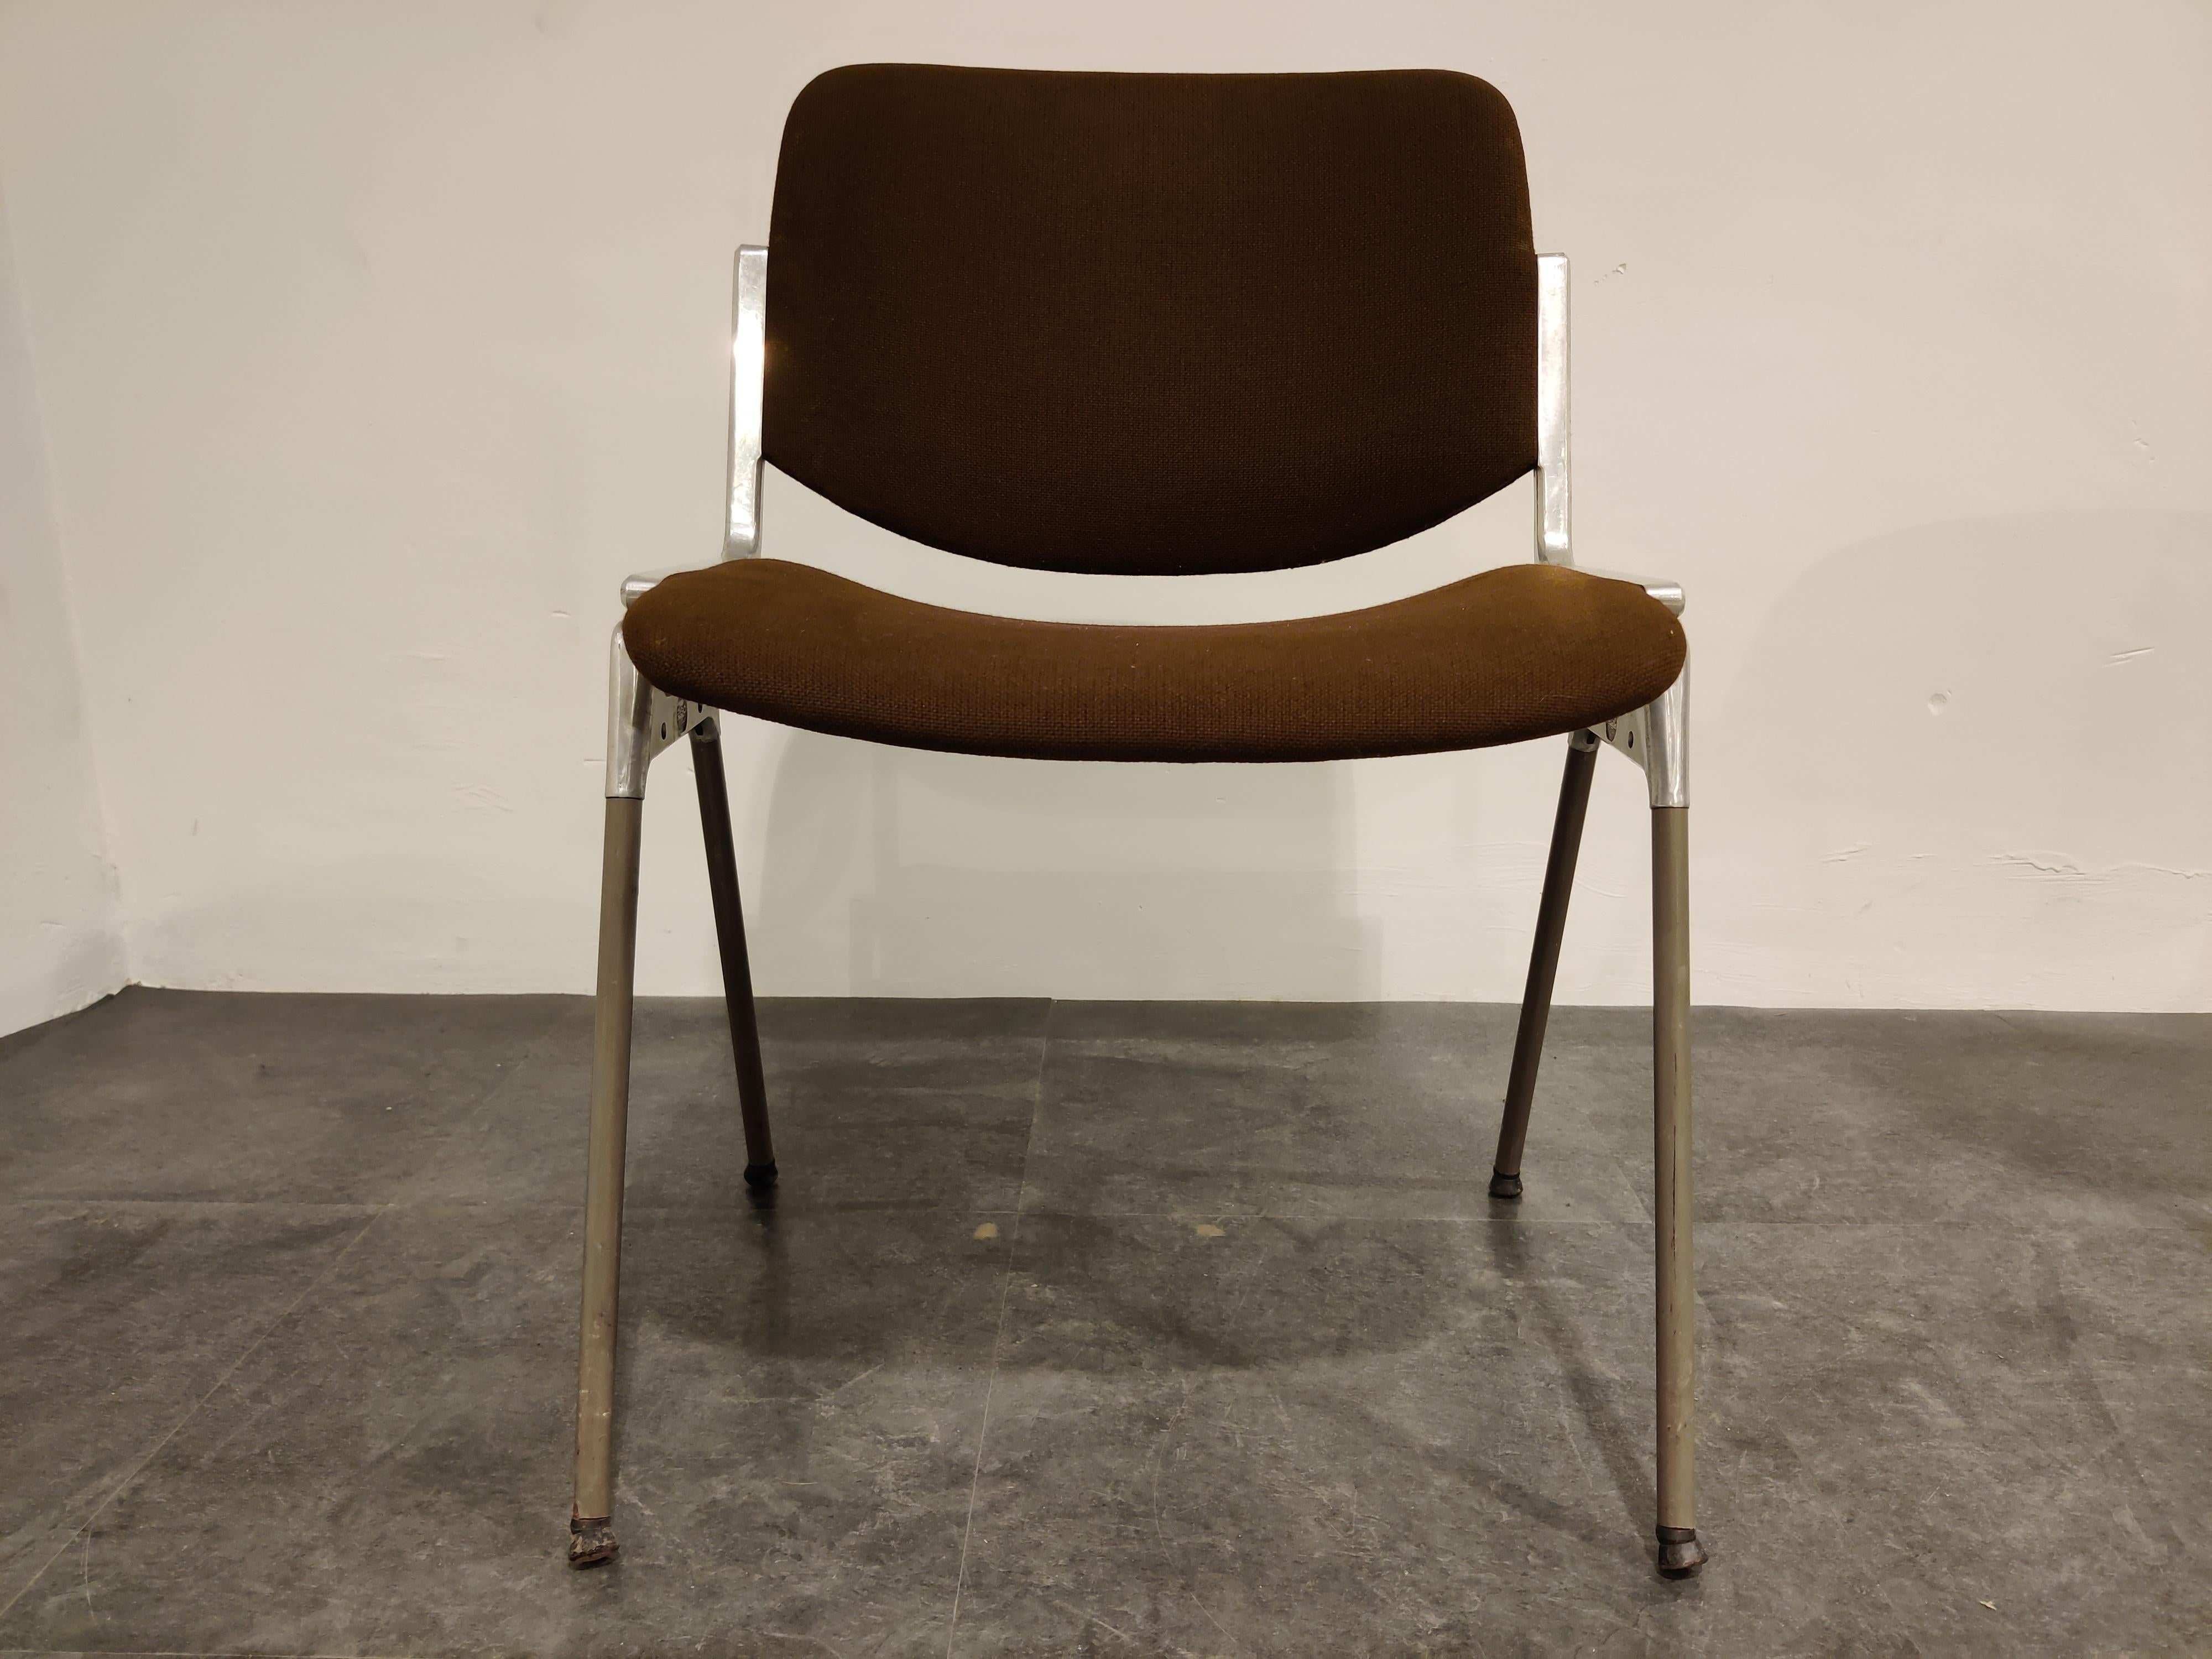 Vintage dining chairs or side chairs designed by Giancarlo Piretti for Castelli.

We have 15 pieces available

These chairs can be stacked up in large amounts and save up a lot of space for occasional use.

Original brown fabric.

Normal user